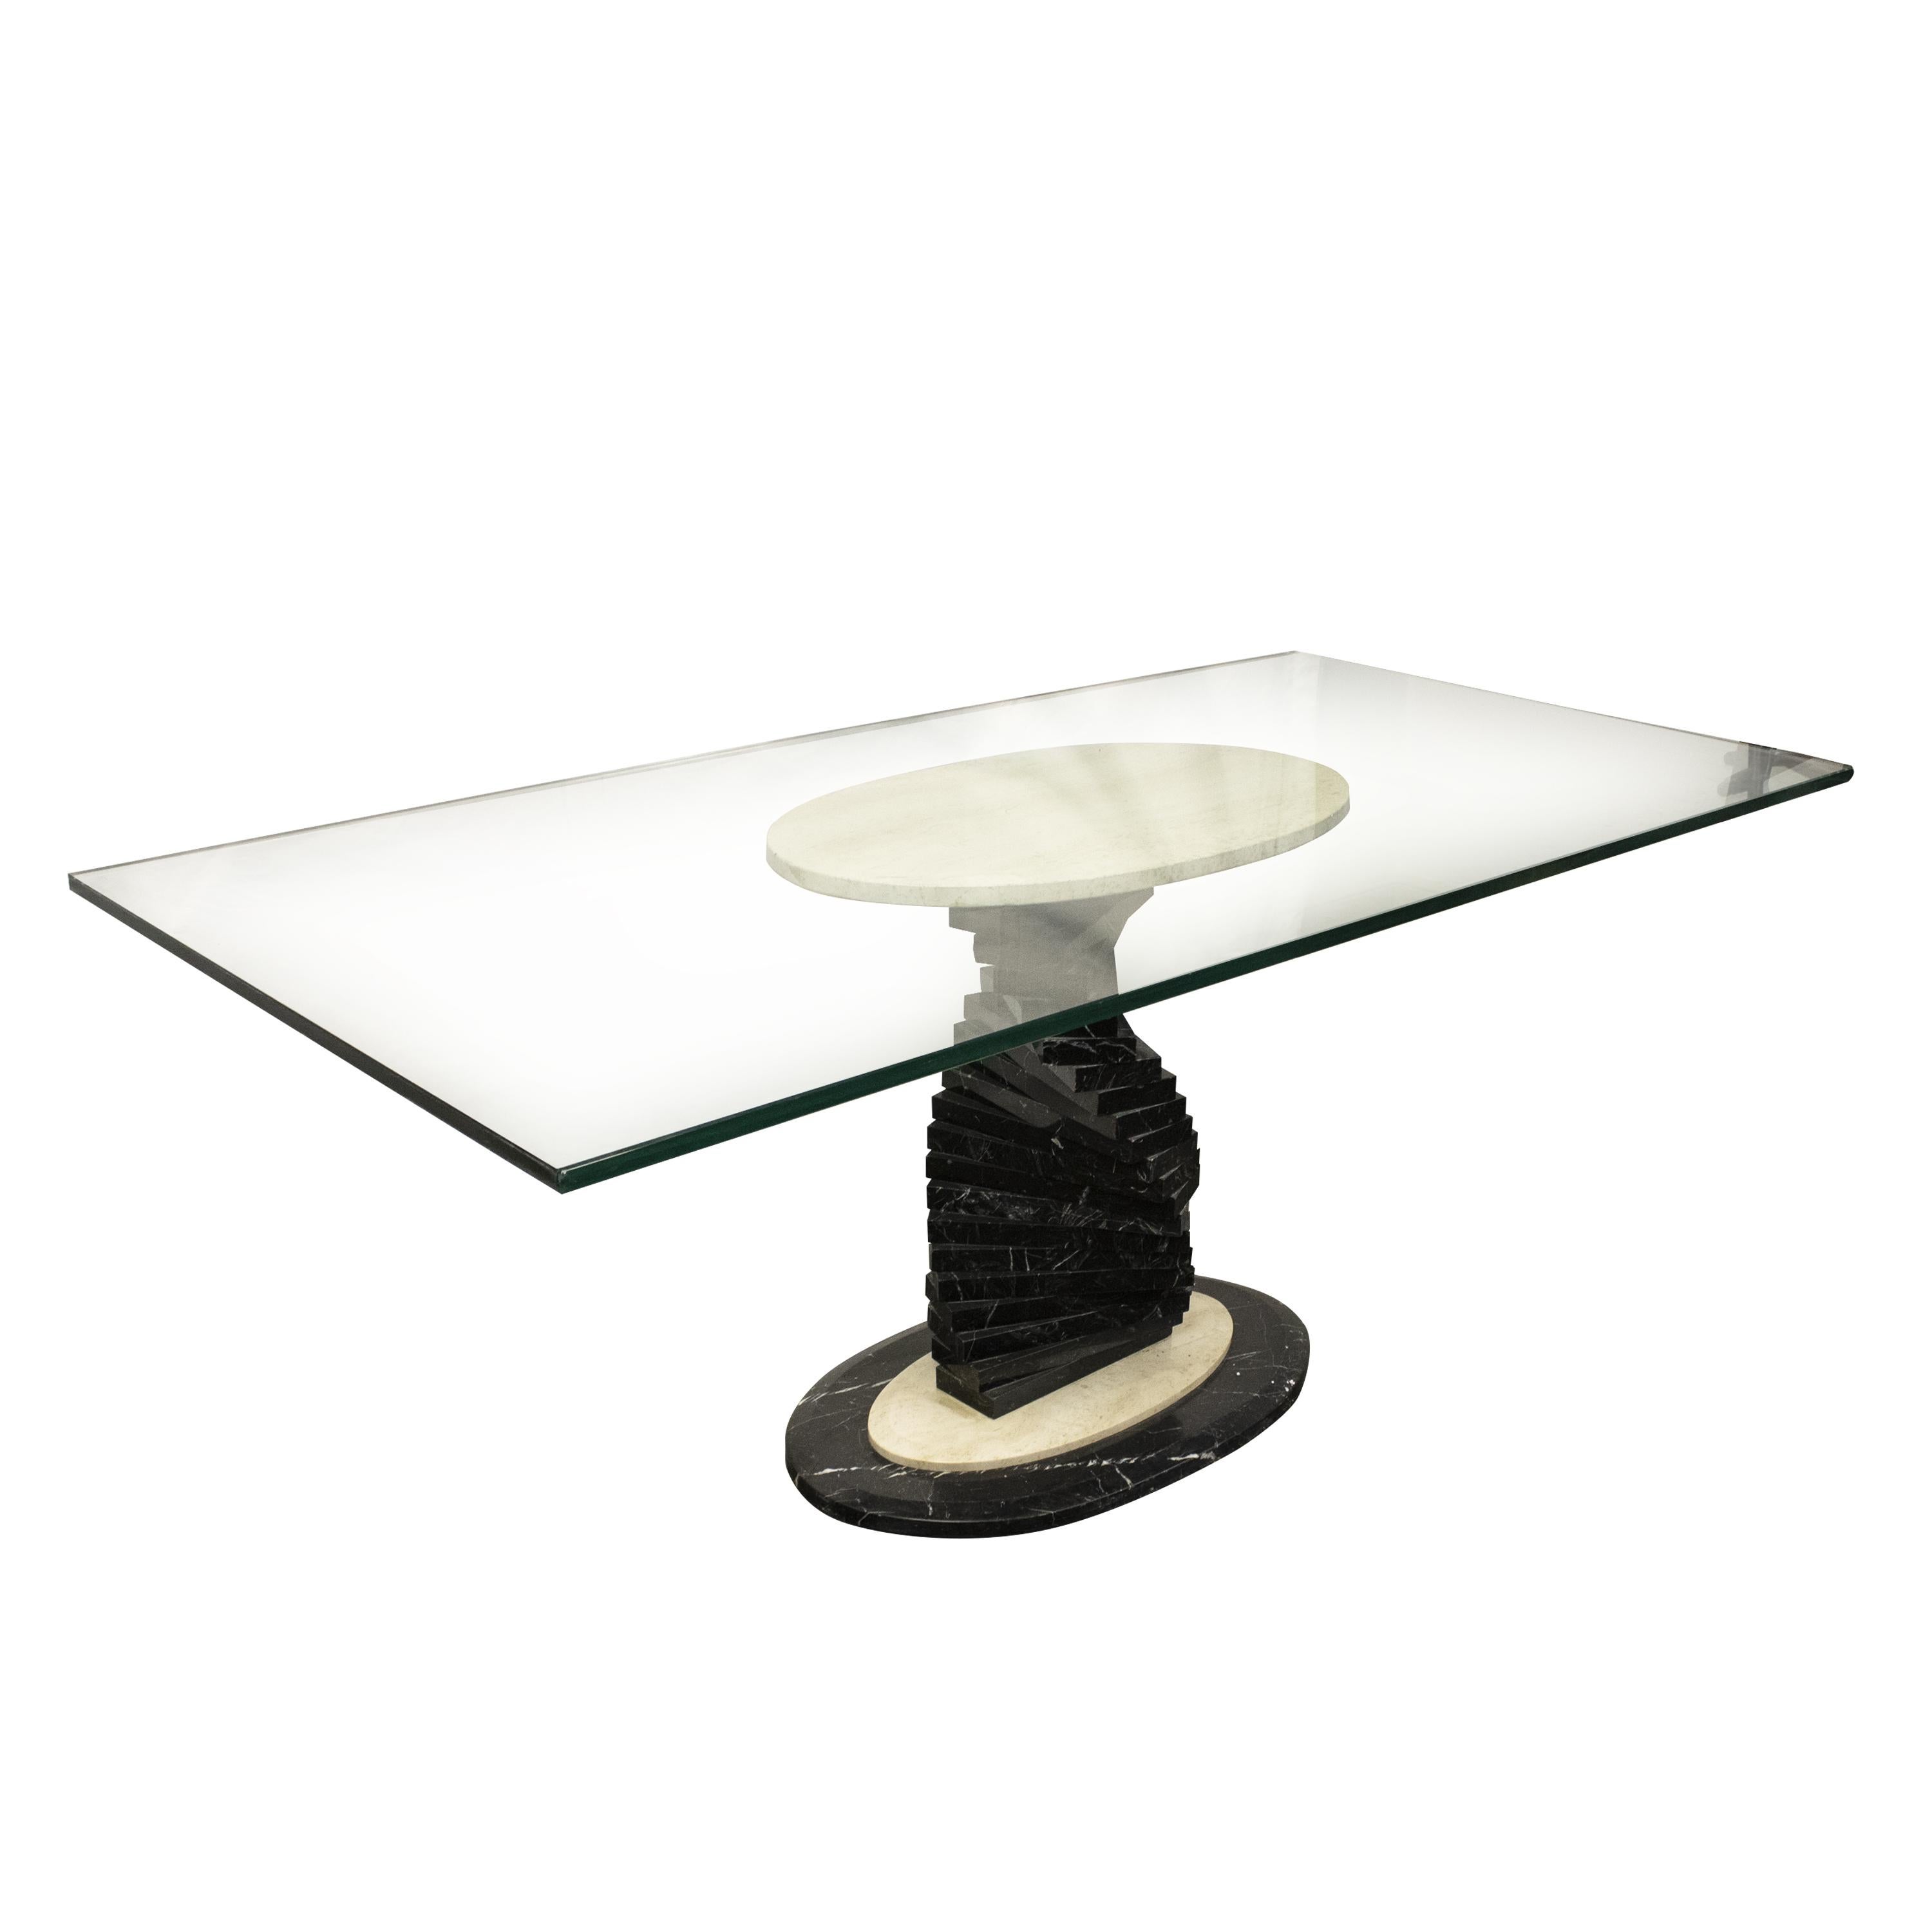 Italian Mid-Century Modern Marble and Glass Dining Table, Italy, 1970 For Sale